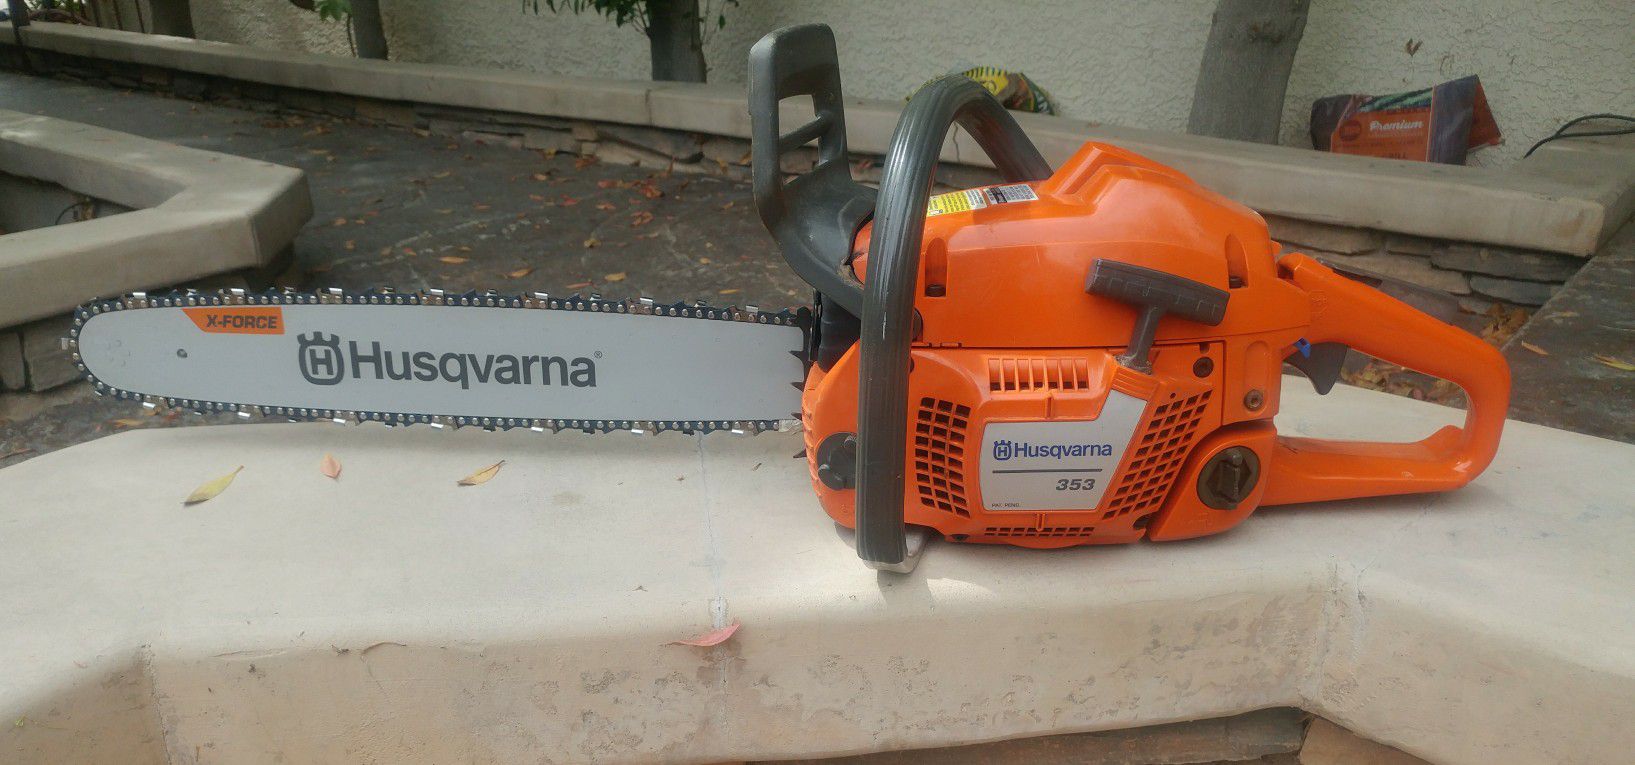 Husqvarna 353 Chainsaw. IF THE AD IS UP ITS AVAILABLE PLEASE DON'T ASK "IS THIS SILL AVAILABLE"